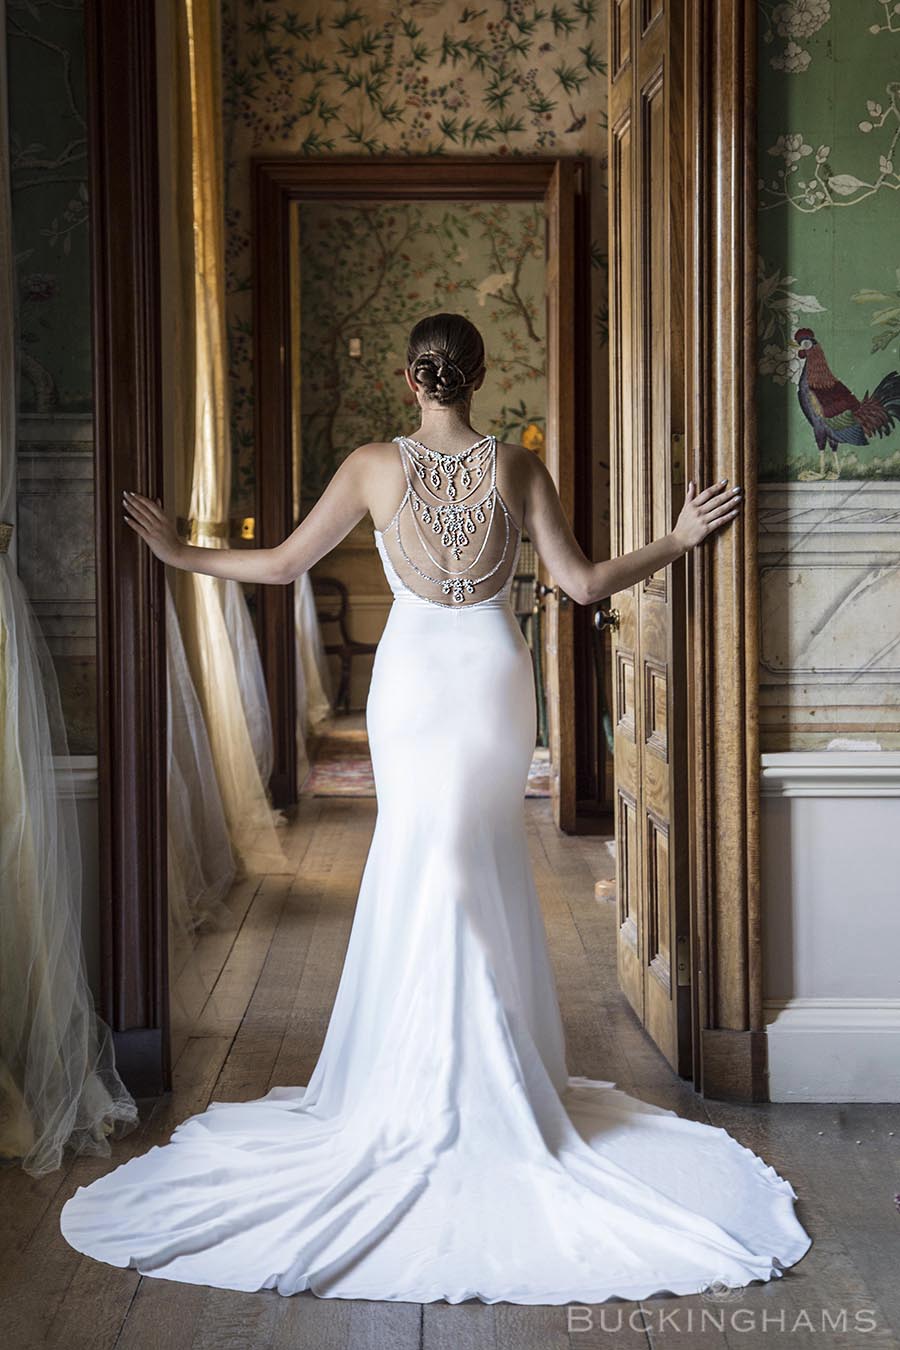 Image of bride facing away from the camera, stood in the doorway of one of the state rooms 